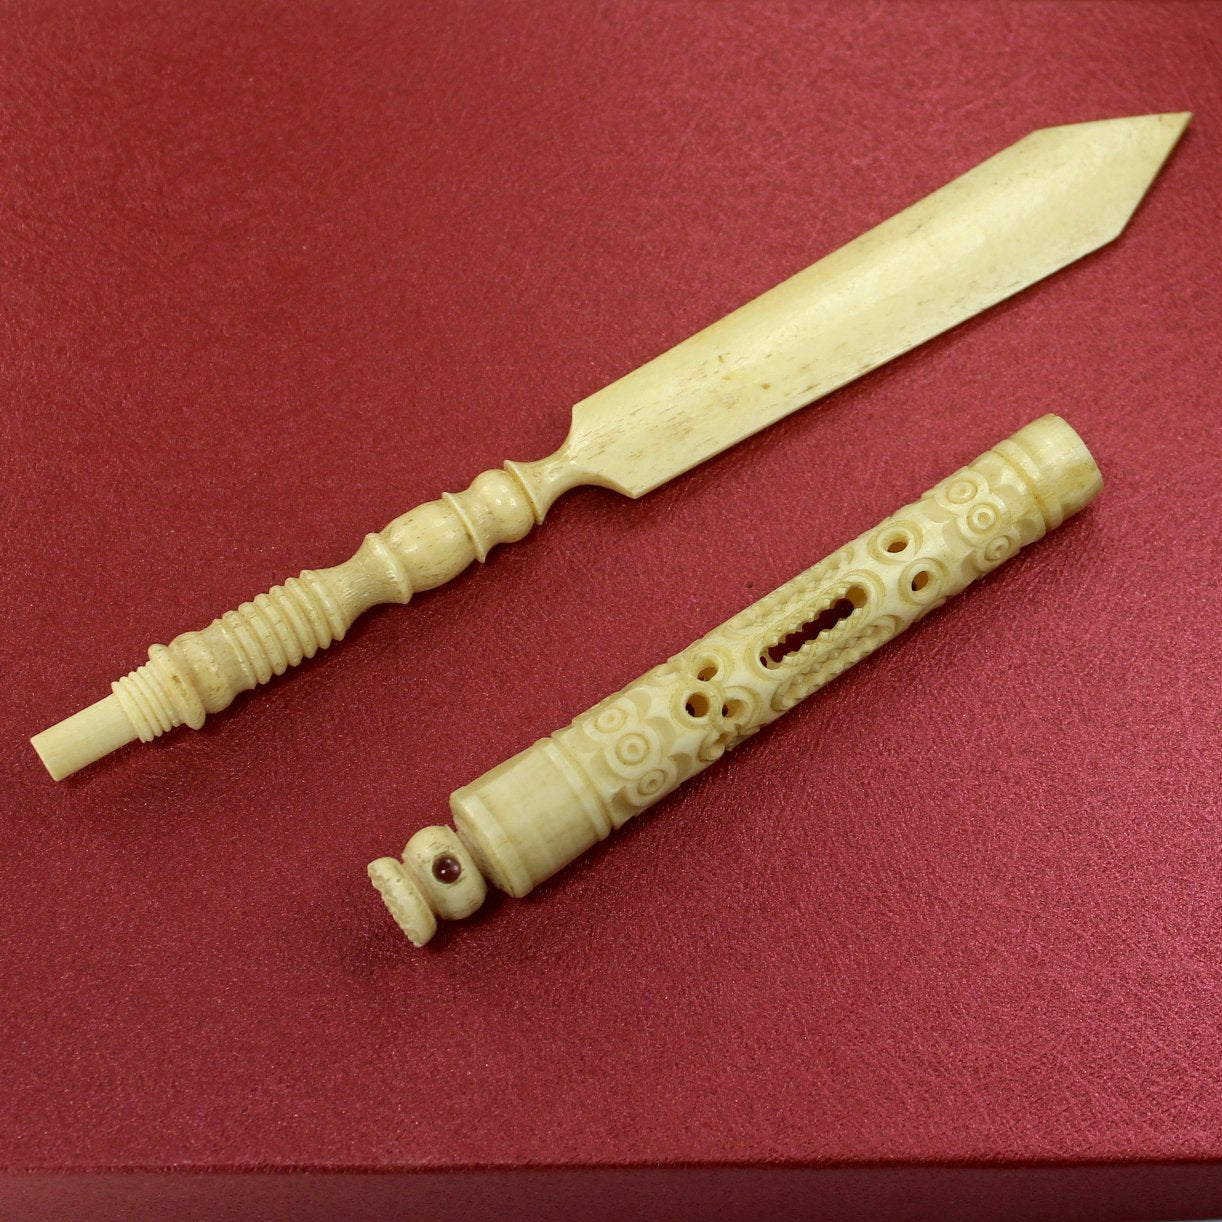 Stanhope Collectible Antique Bone Ivory Dip Pen Letter Opener Niagara Falls 6 Scenes 2 pieces shown